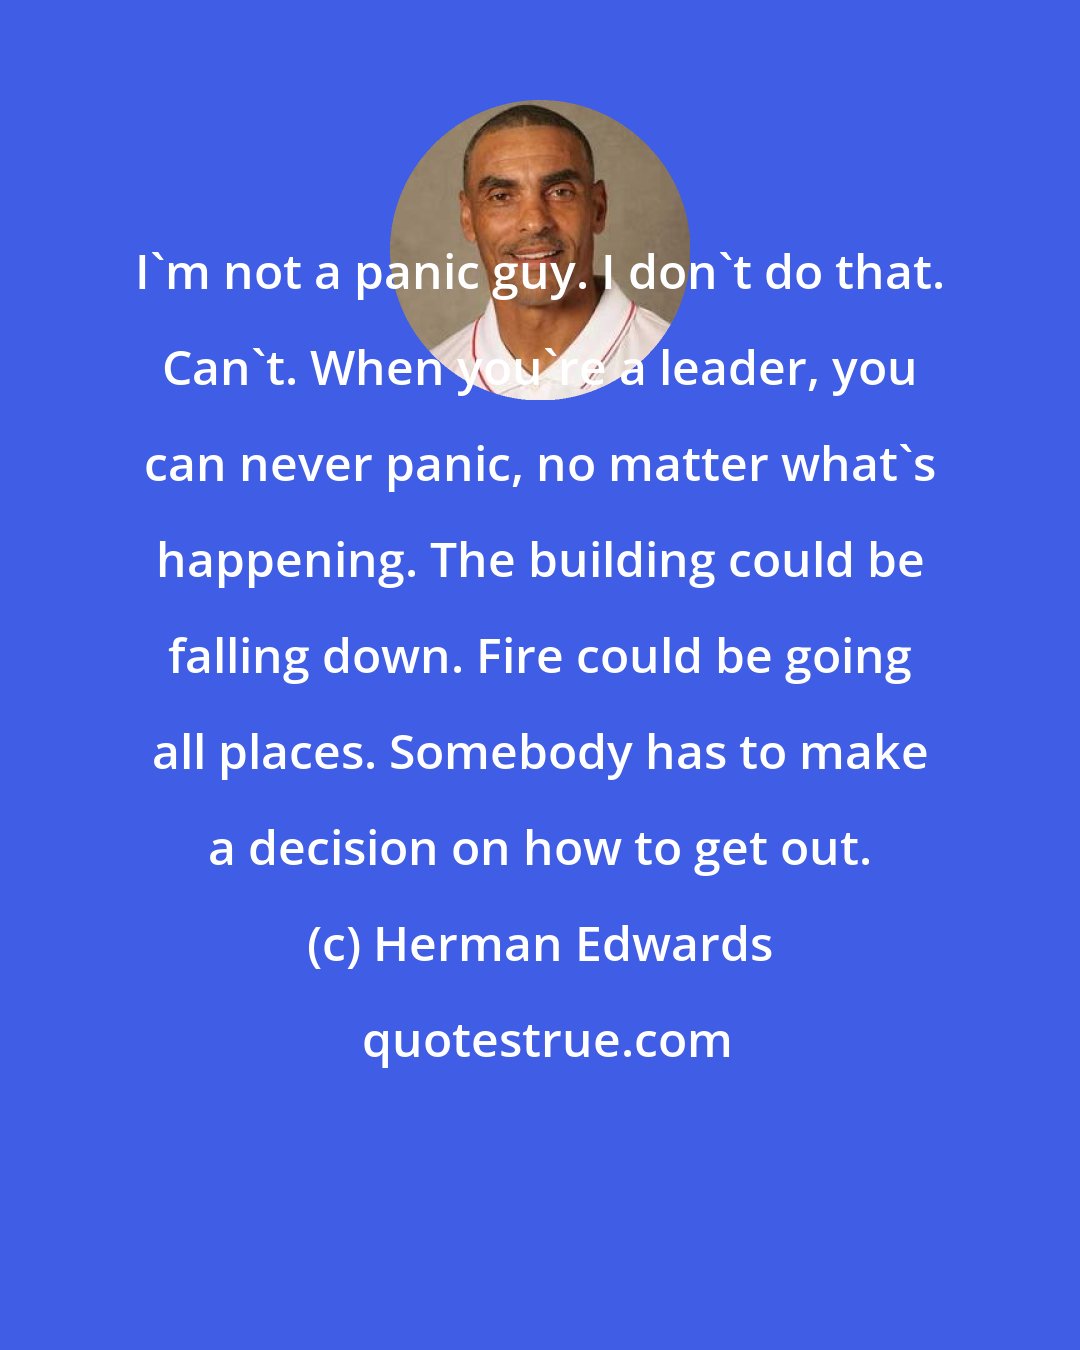 Herman Edwards: I'm not a panic guy. I don't do that. Can't. When you're a leader, you can never panic, no matter what's happening. The building could be falling down. Fire could be going all places. Somebody has to make a decision on how to get out.